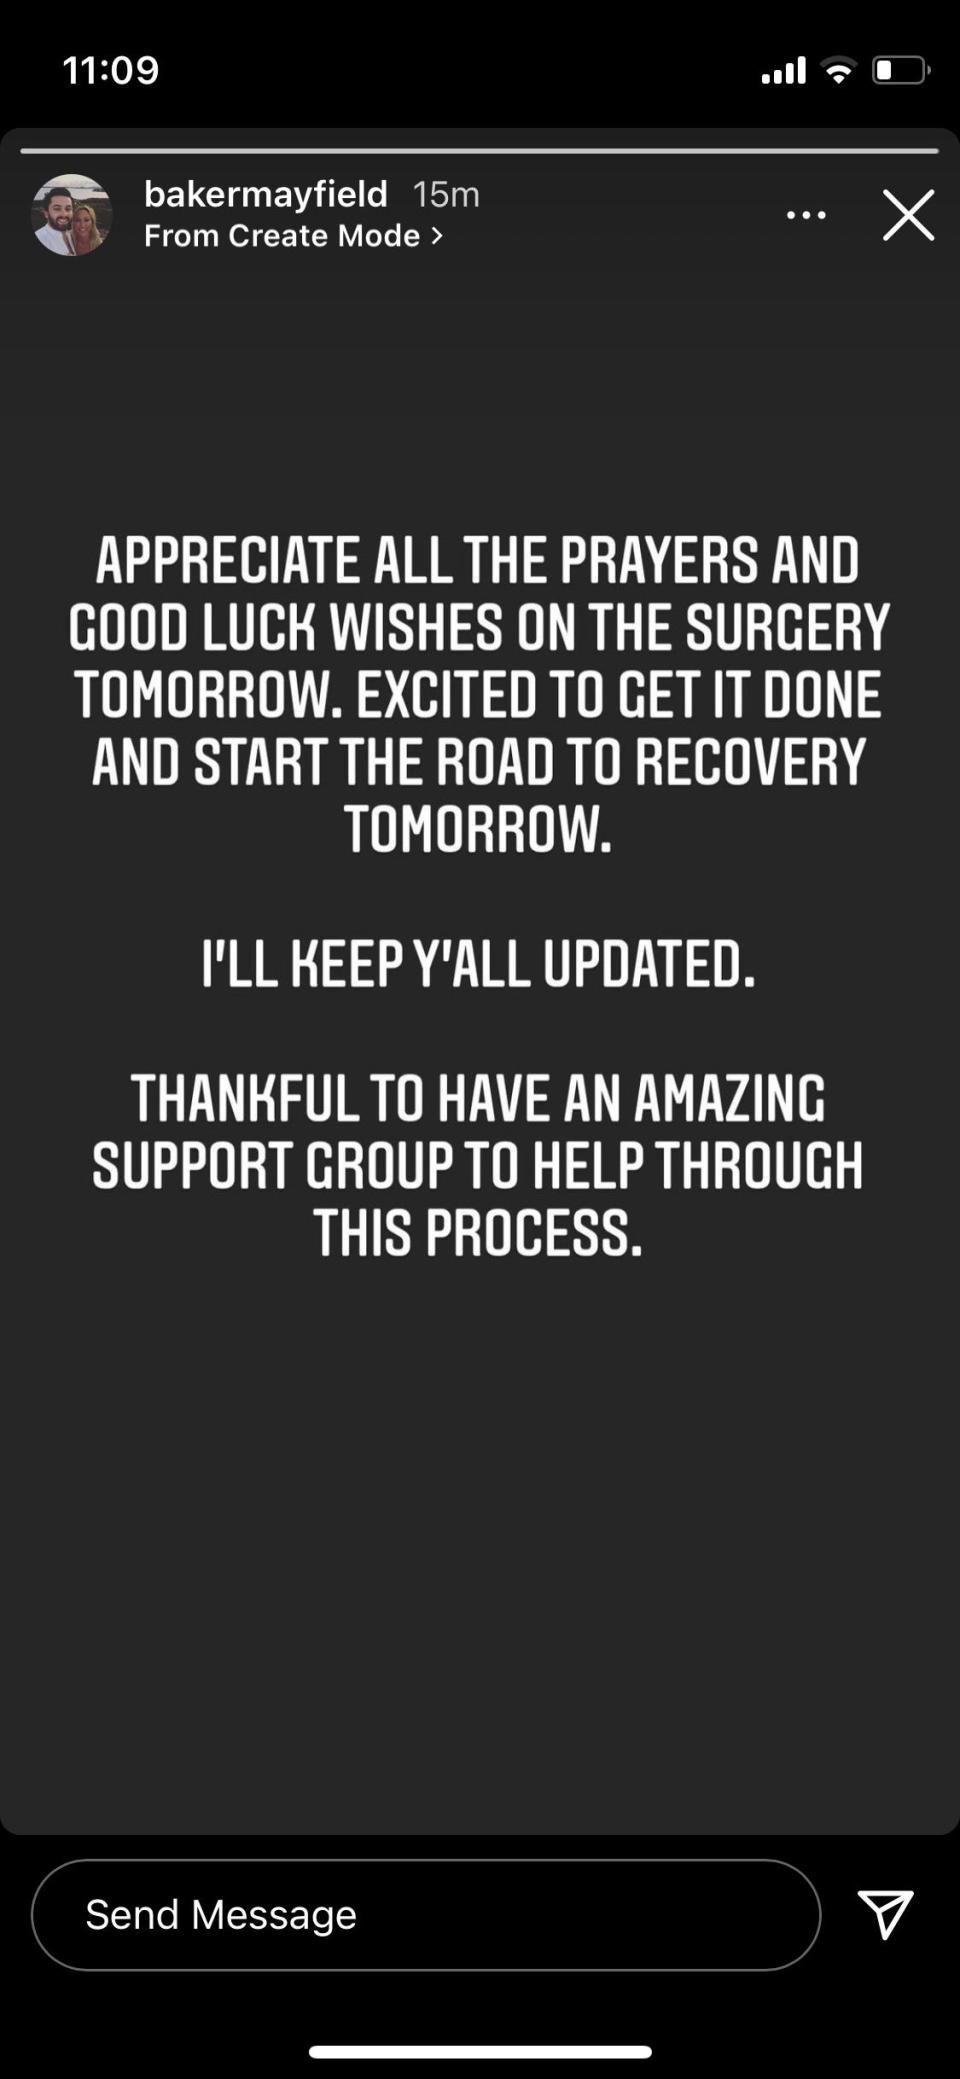 Cleveland Browns quarterback Baker Mayfield posted an Instagram story on the eve of his shoulder surgery.